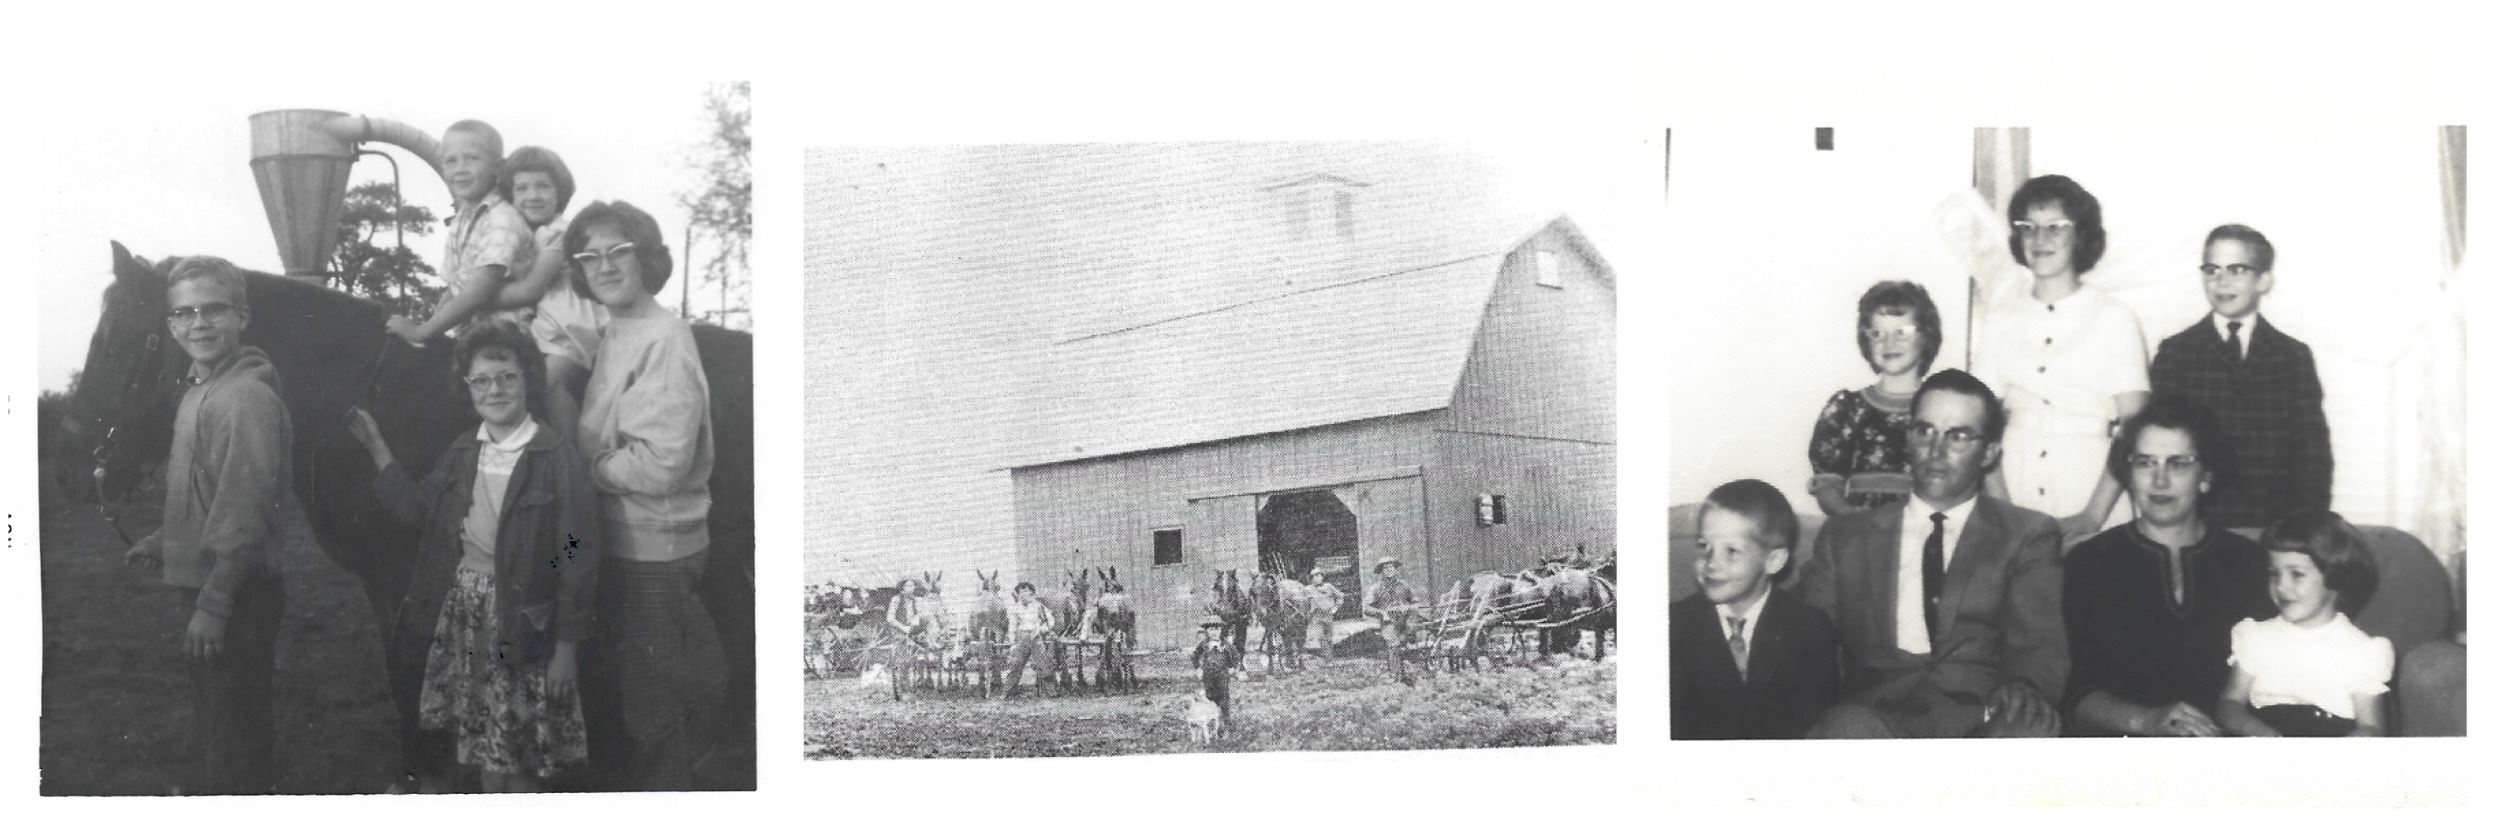 Past photos of the McLaughlin family and barn